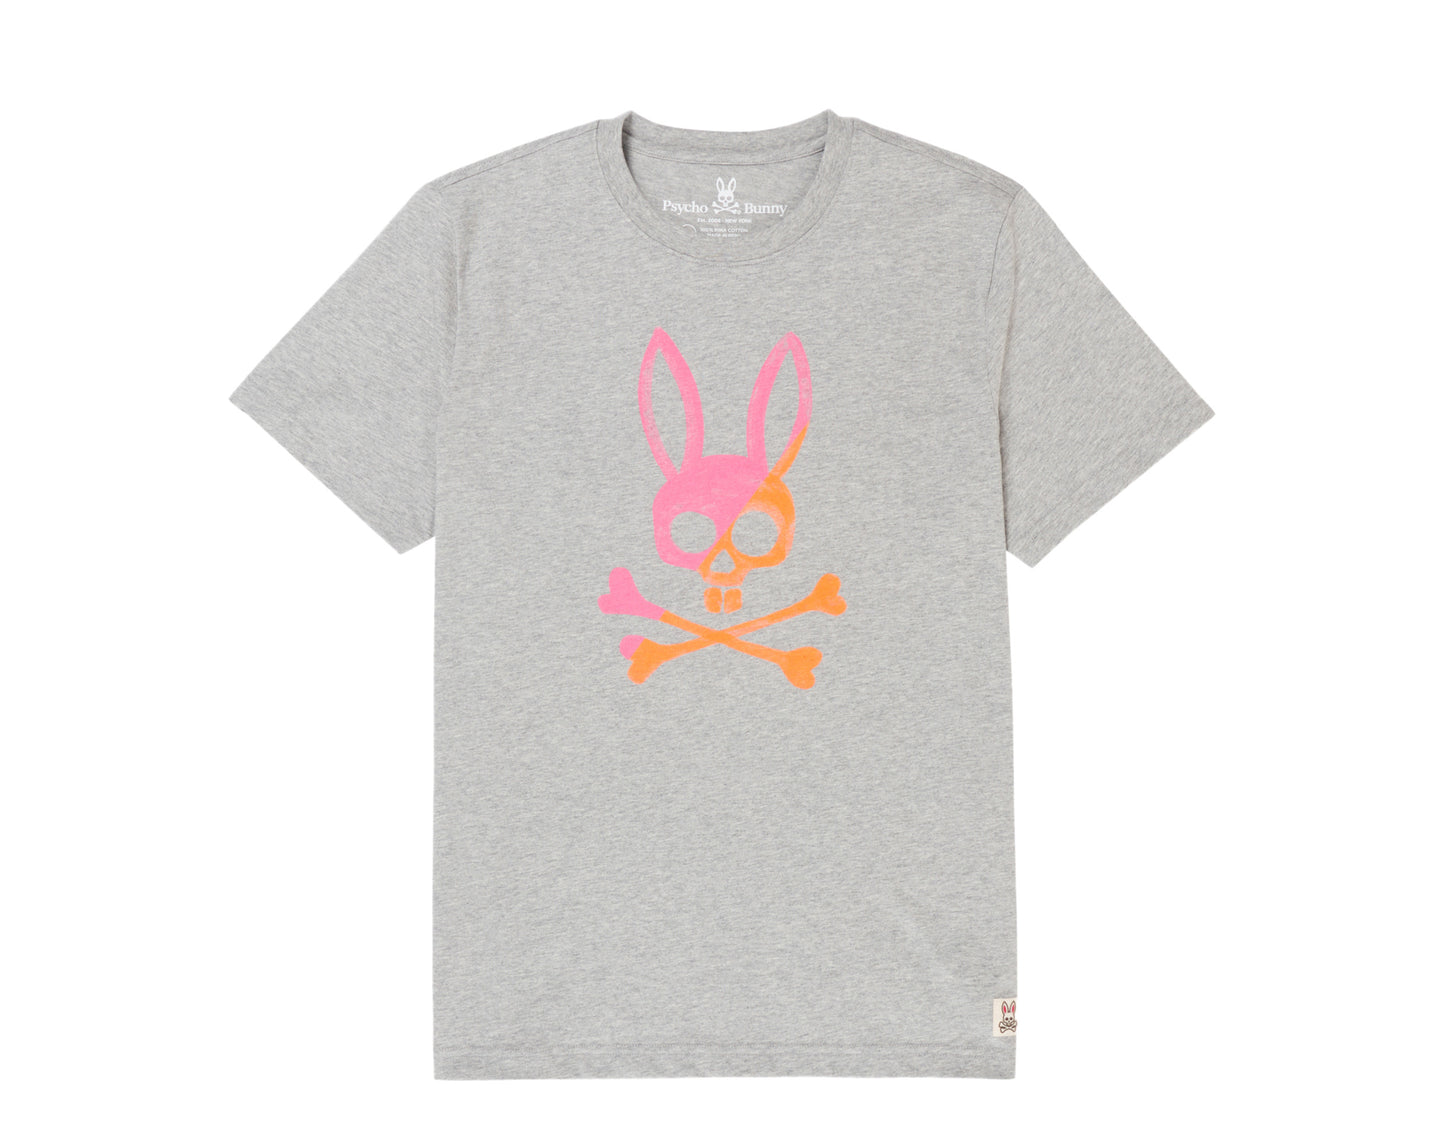 Psycho Bunny Andover Graphic Heather Grey/Pink Men's Tee Shirt B6U999L1PC-HGY